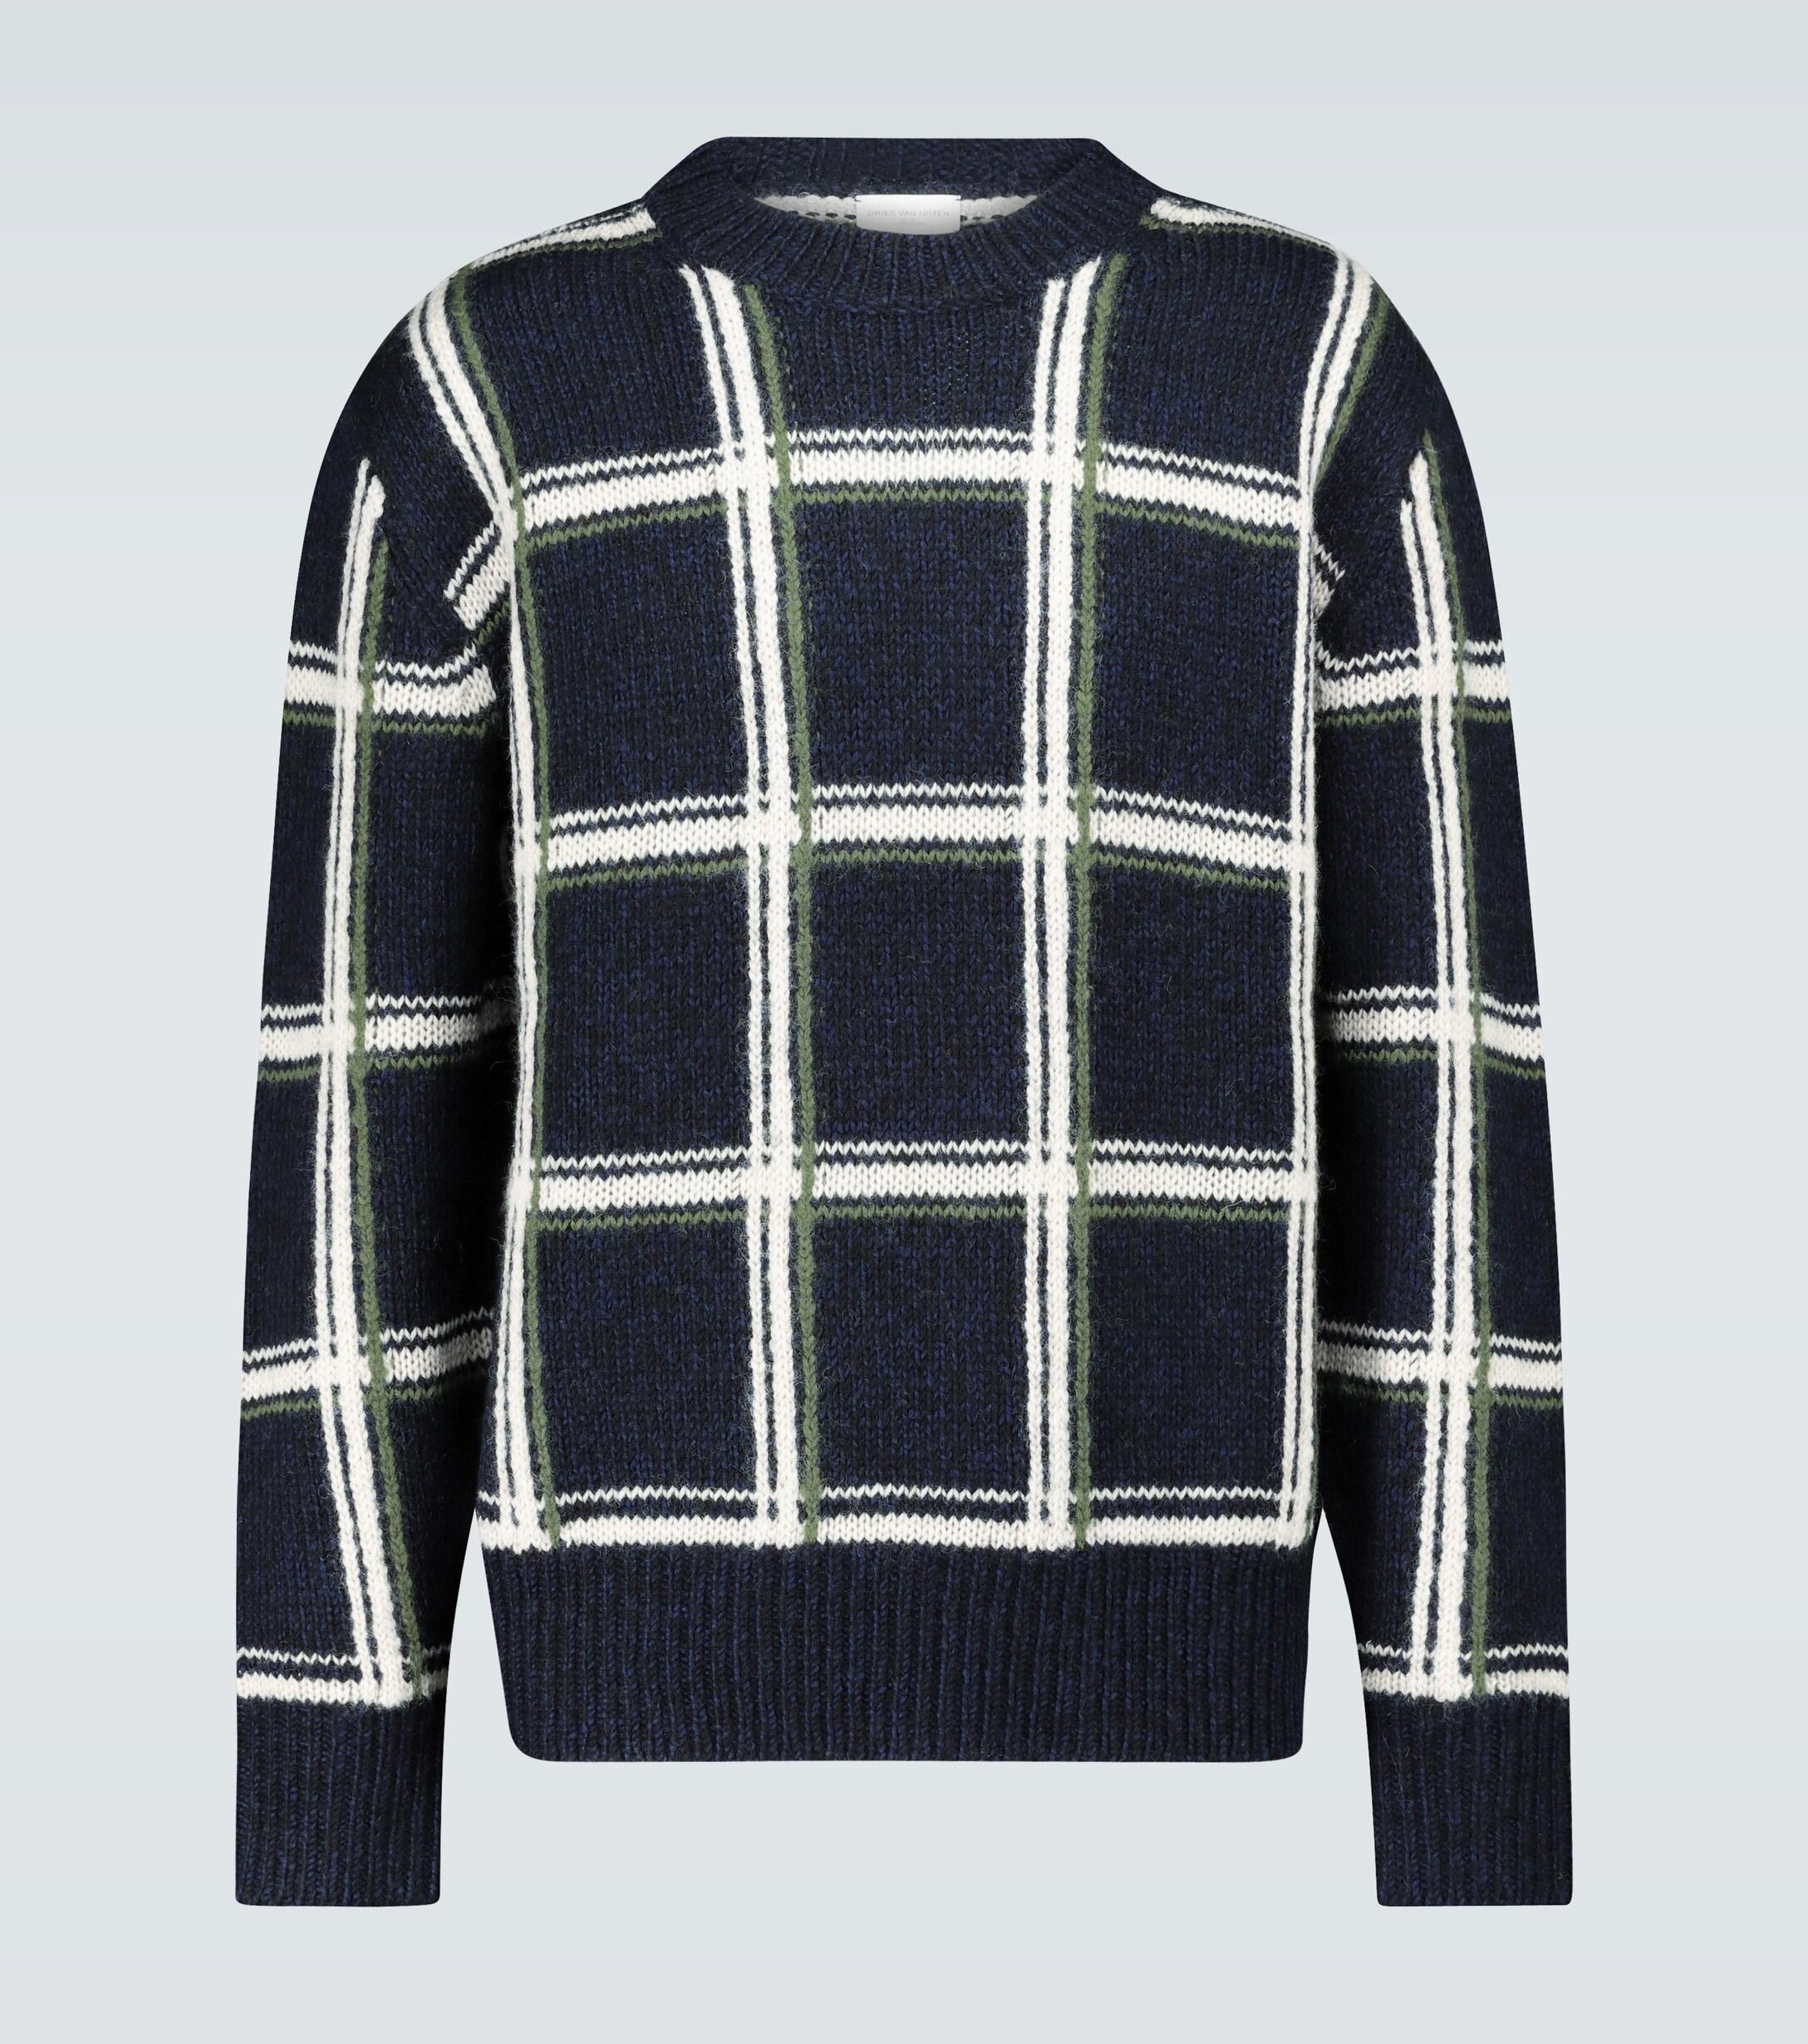 Dries Van Noten Wool Checked Knitted Sweater in Black for Men - Lyst